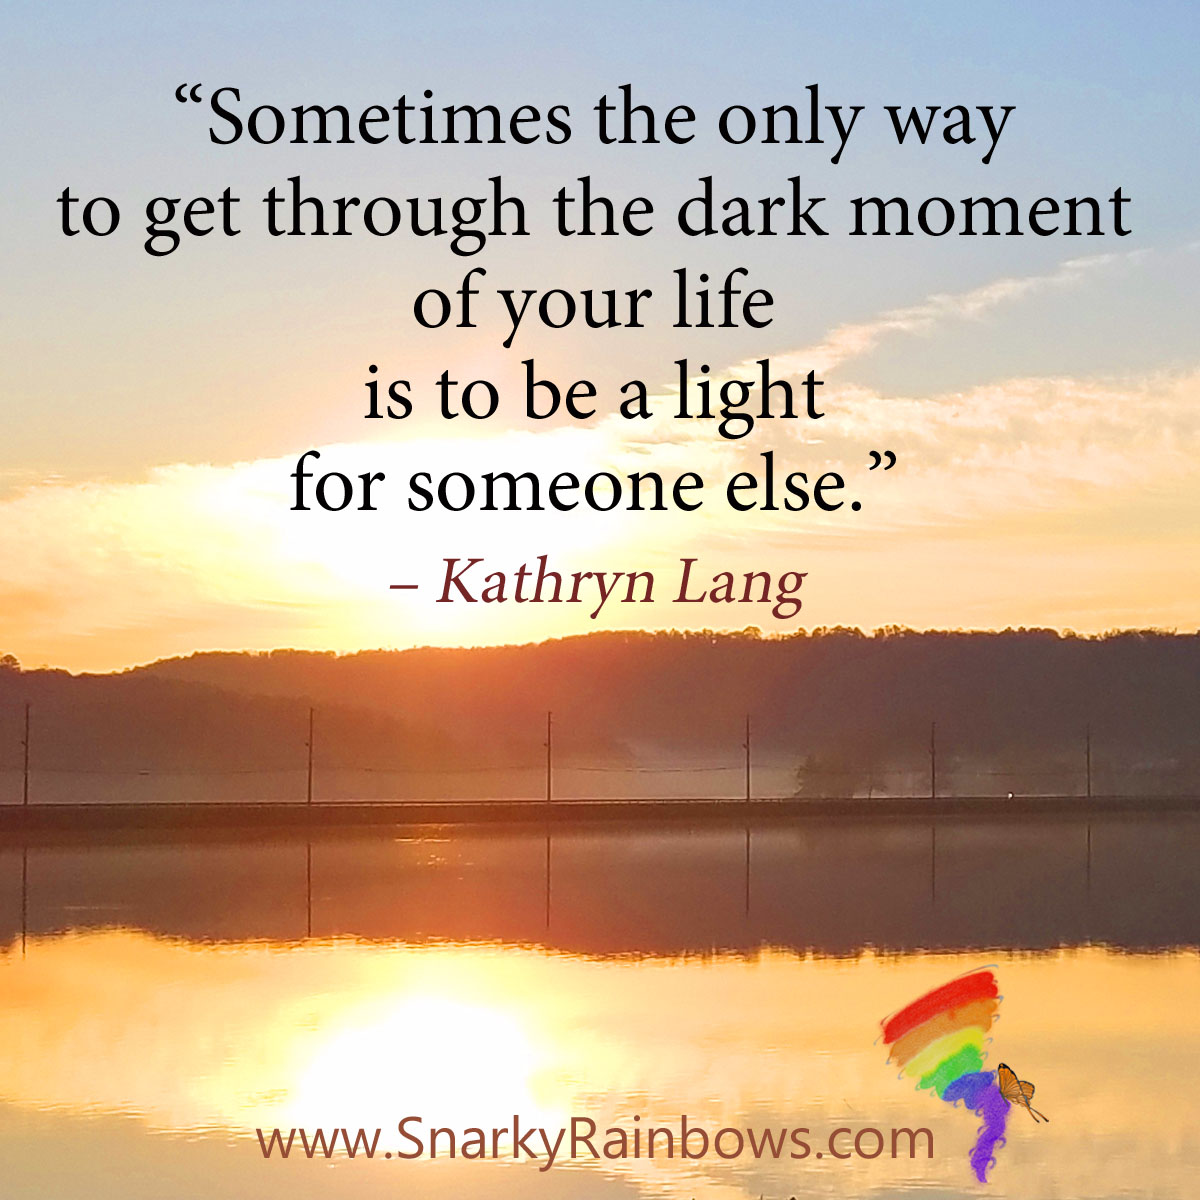 #QuoteoftheDay - be a light